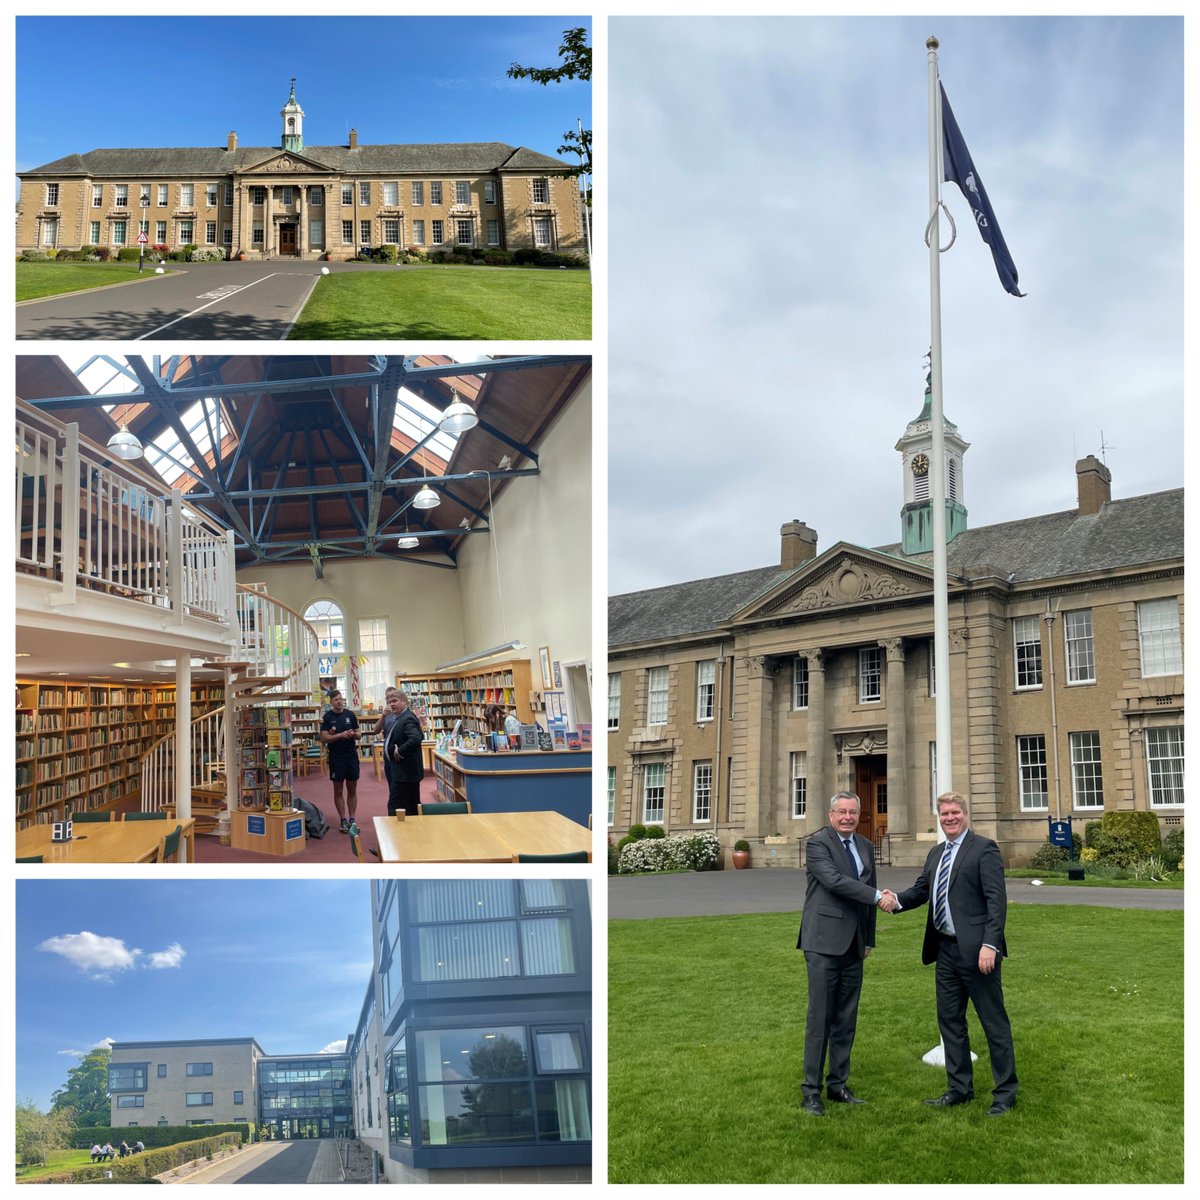 The General Secretary congratulates Jonathan Anderson on Merchiston’s @MerchiNews 125th anniversary of @HMC_Org membership. Thanks to Olly for a great tour of the school including the outstanding grounds and to Archie and the incoming Triumvirate of student leaders.